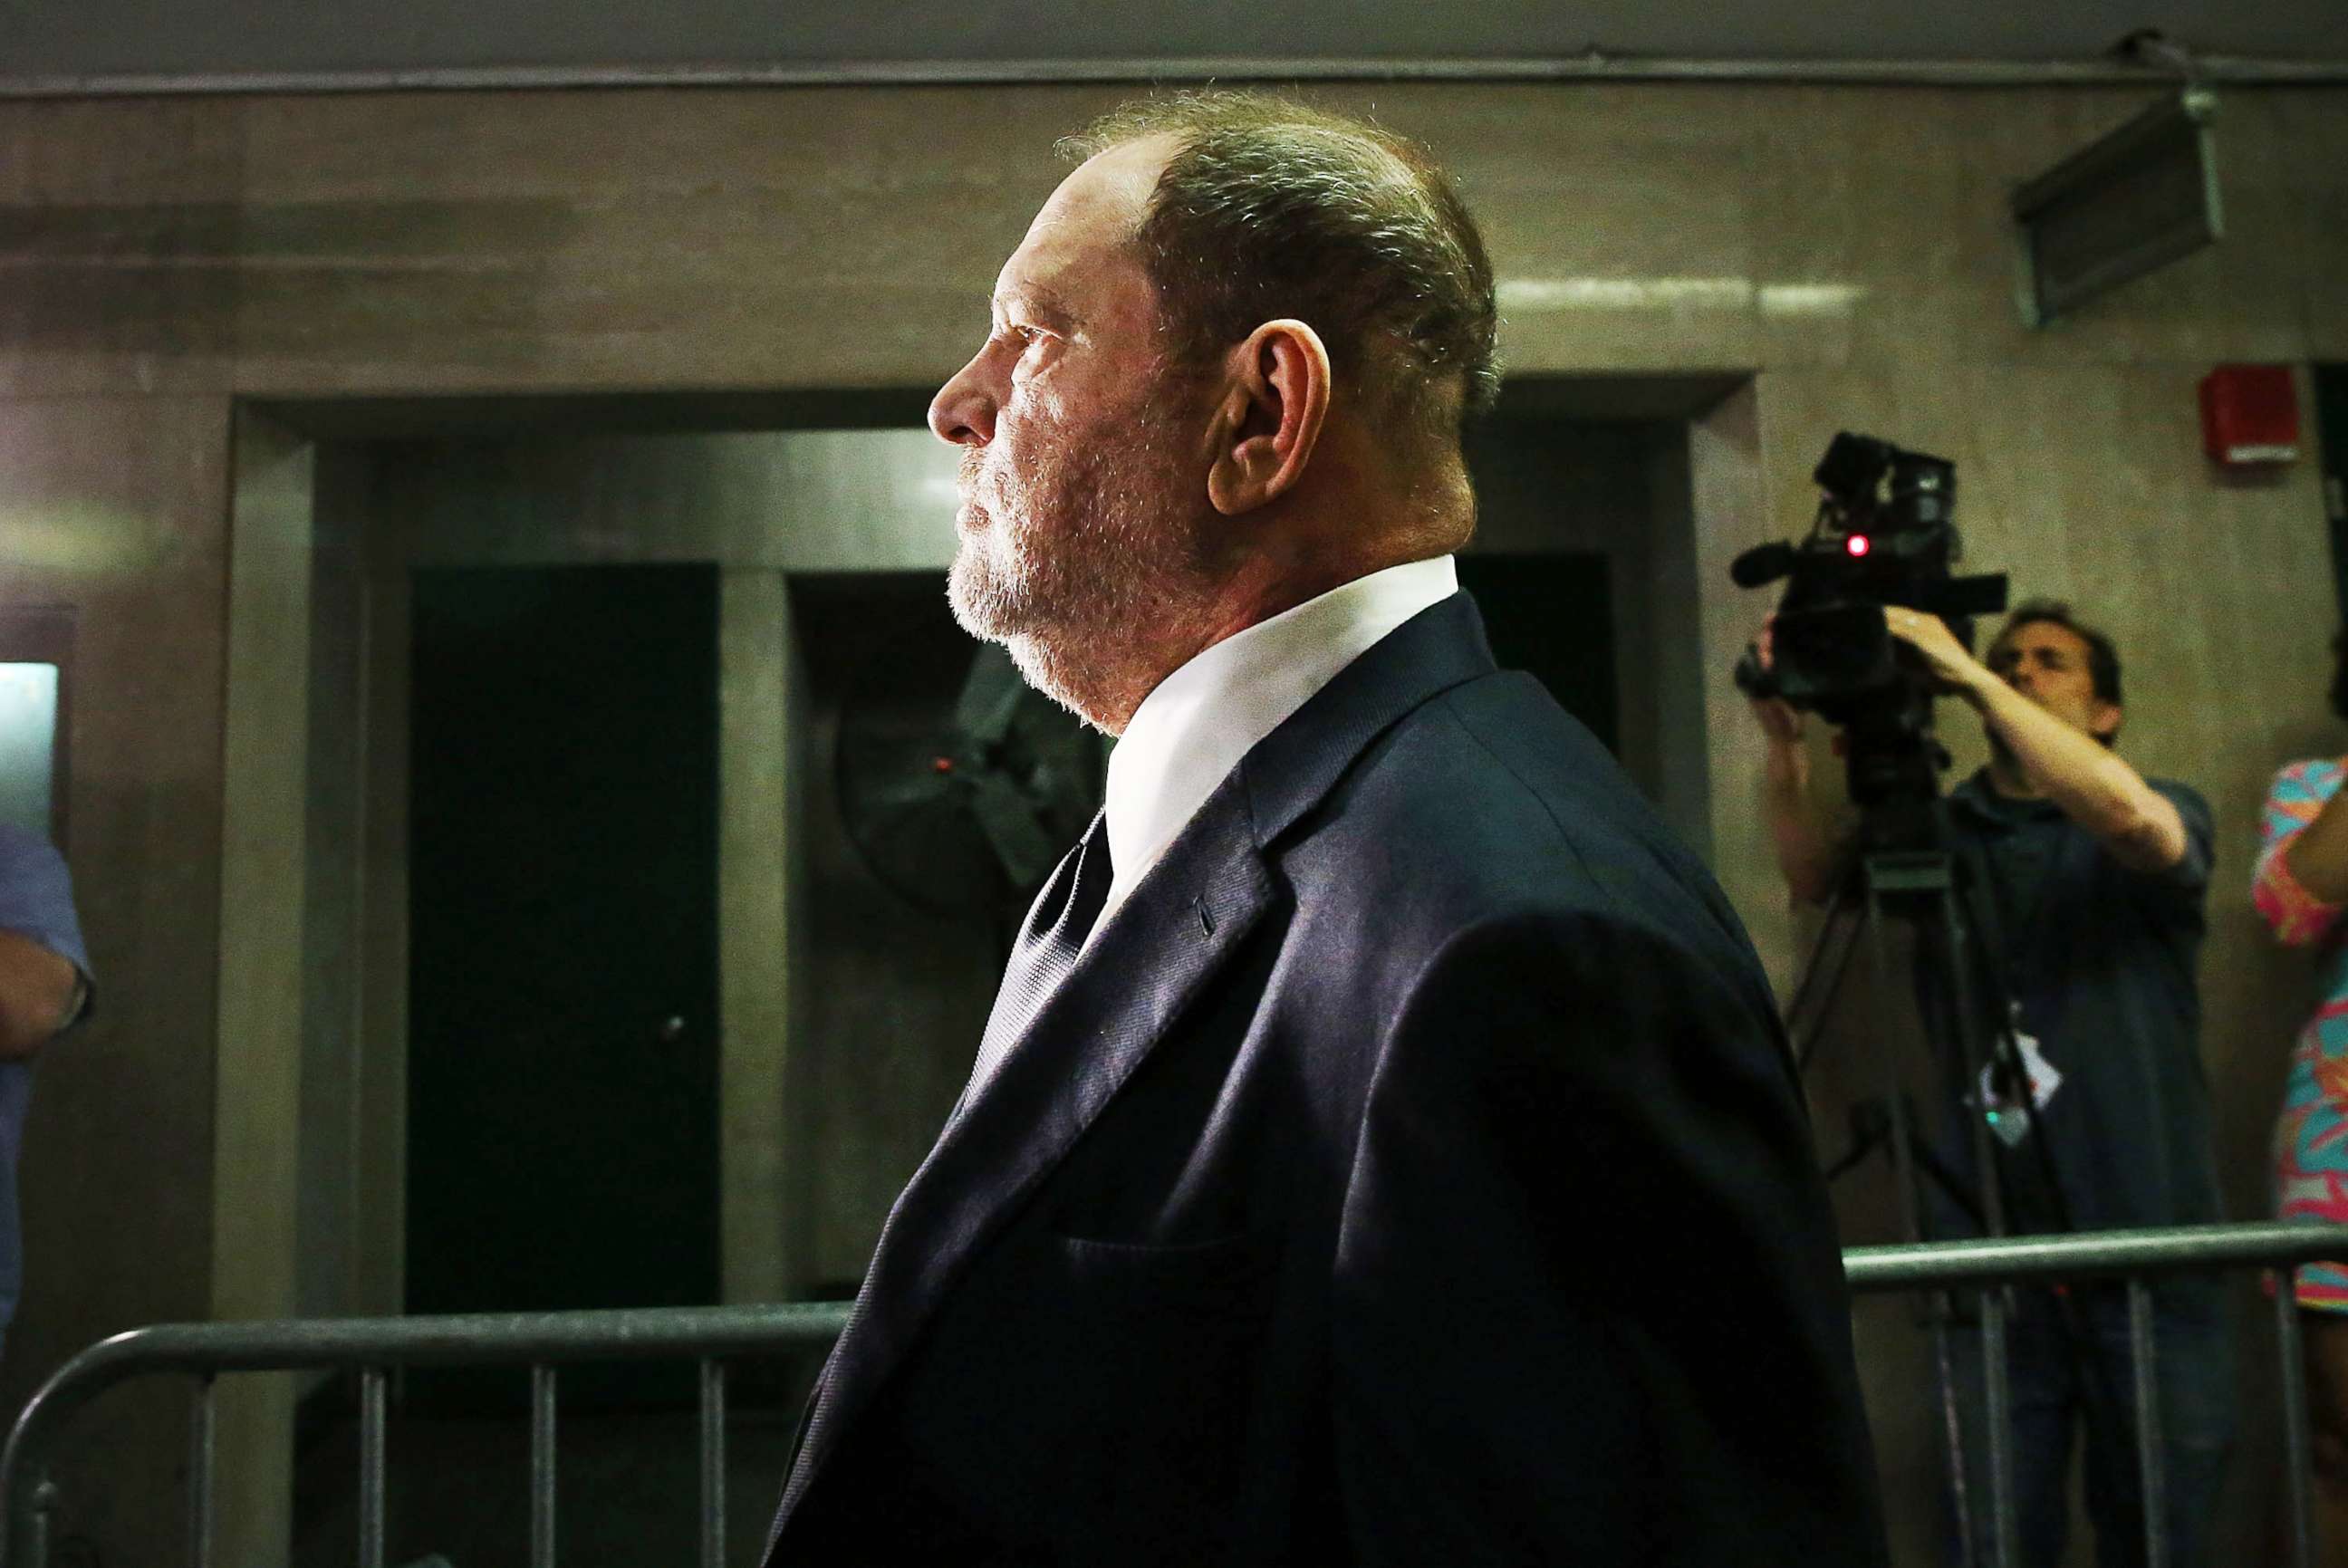 PHOTO: Harvey Weinstein arrives to plead not guilty to three felony counts in New York Supreme Court, June 5, 2018, in New York City.